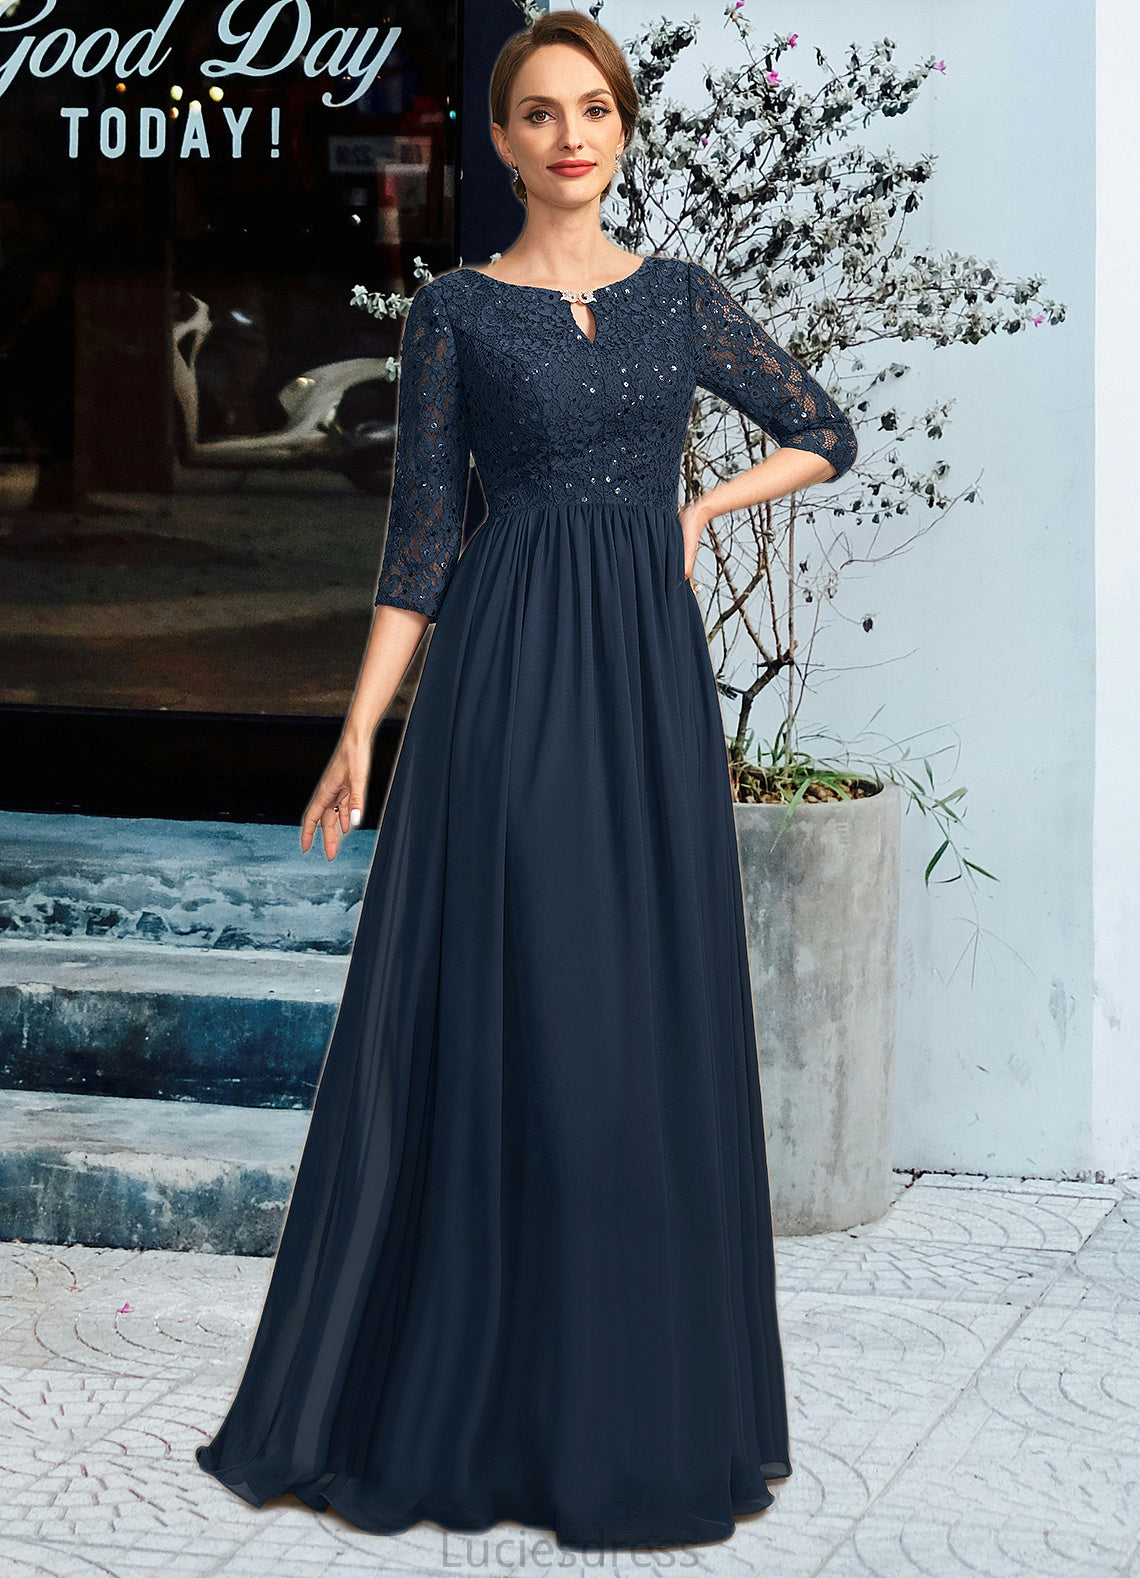 Salome A-line Scoop Floor-Length Chiffon Lace Mother of the Bride Dress With Crystal Brooch Sequins HFP0021961